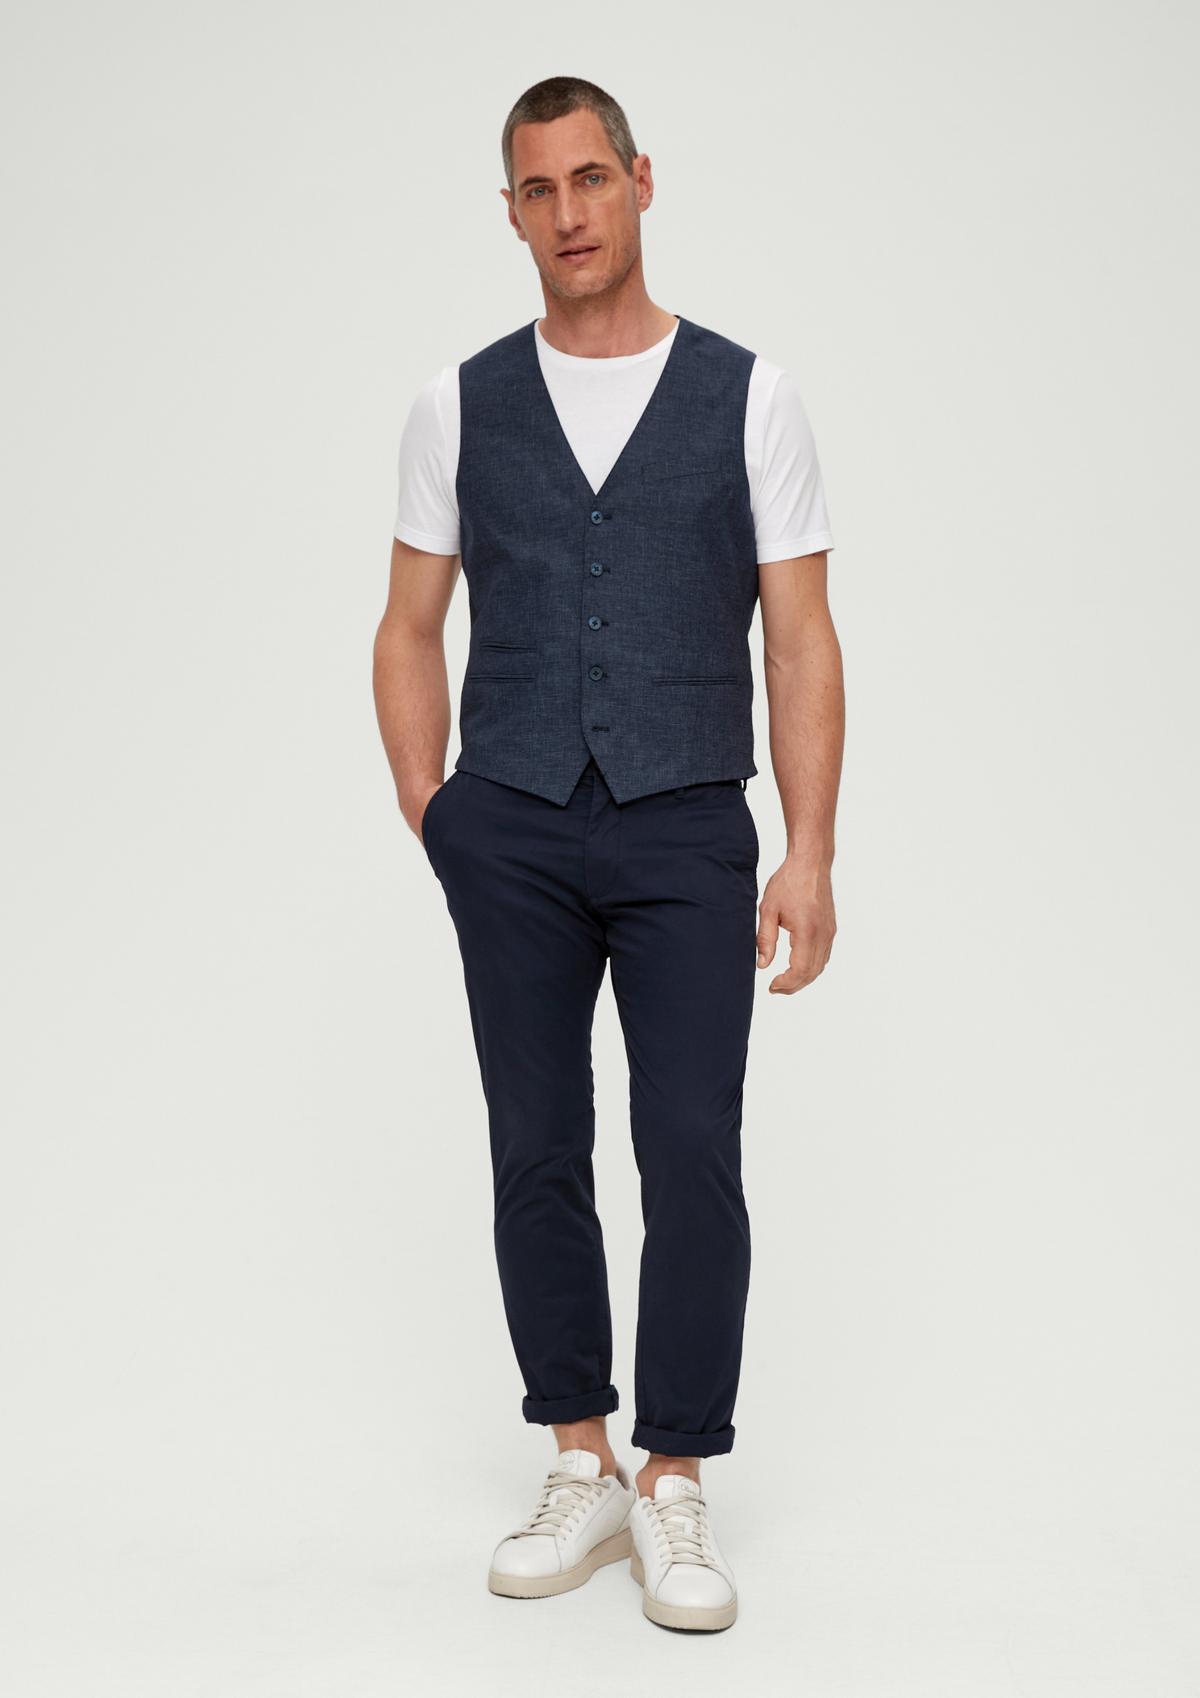 s.Oliver Waistcoat with fine check pattern